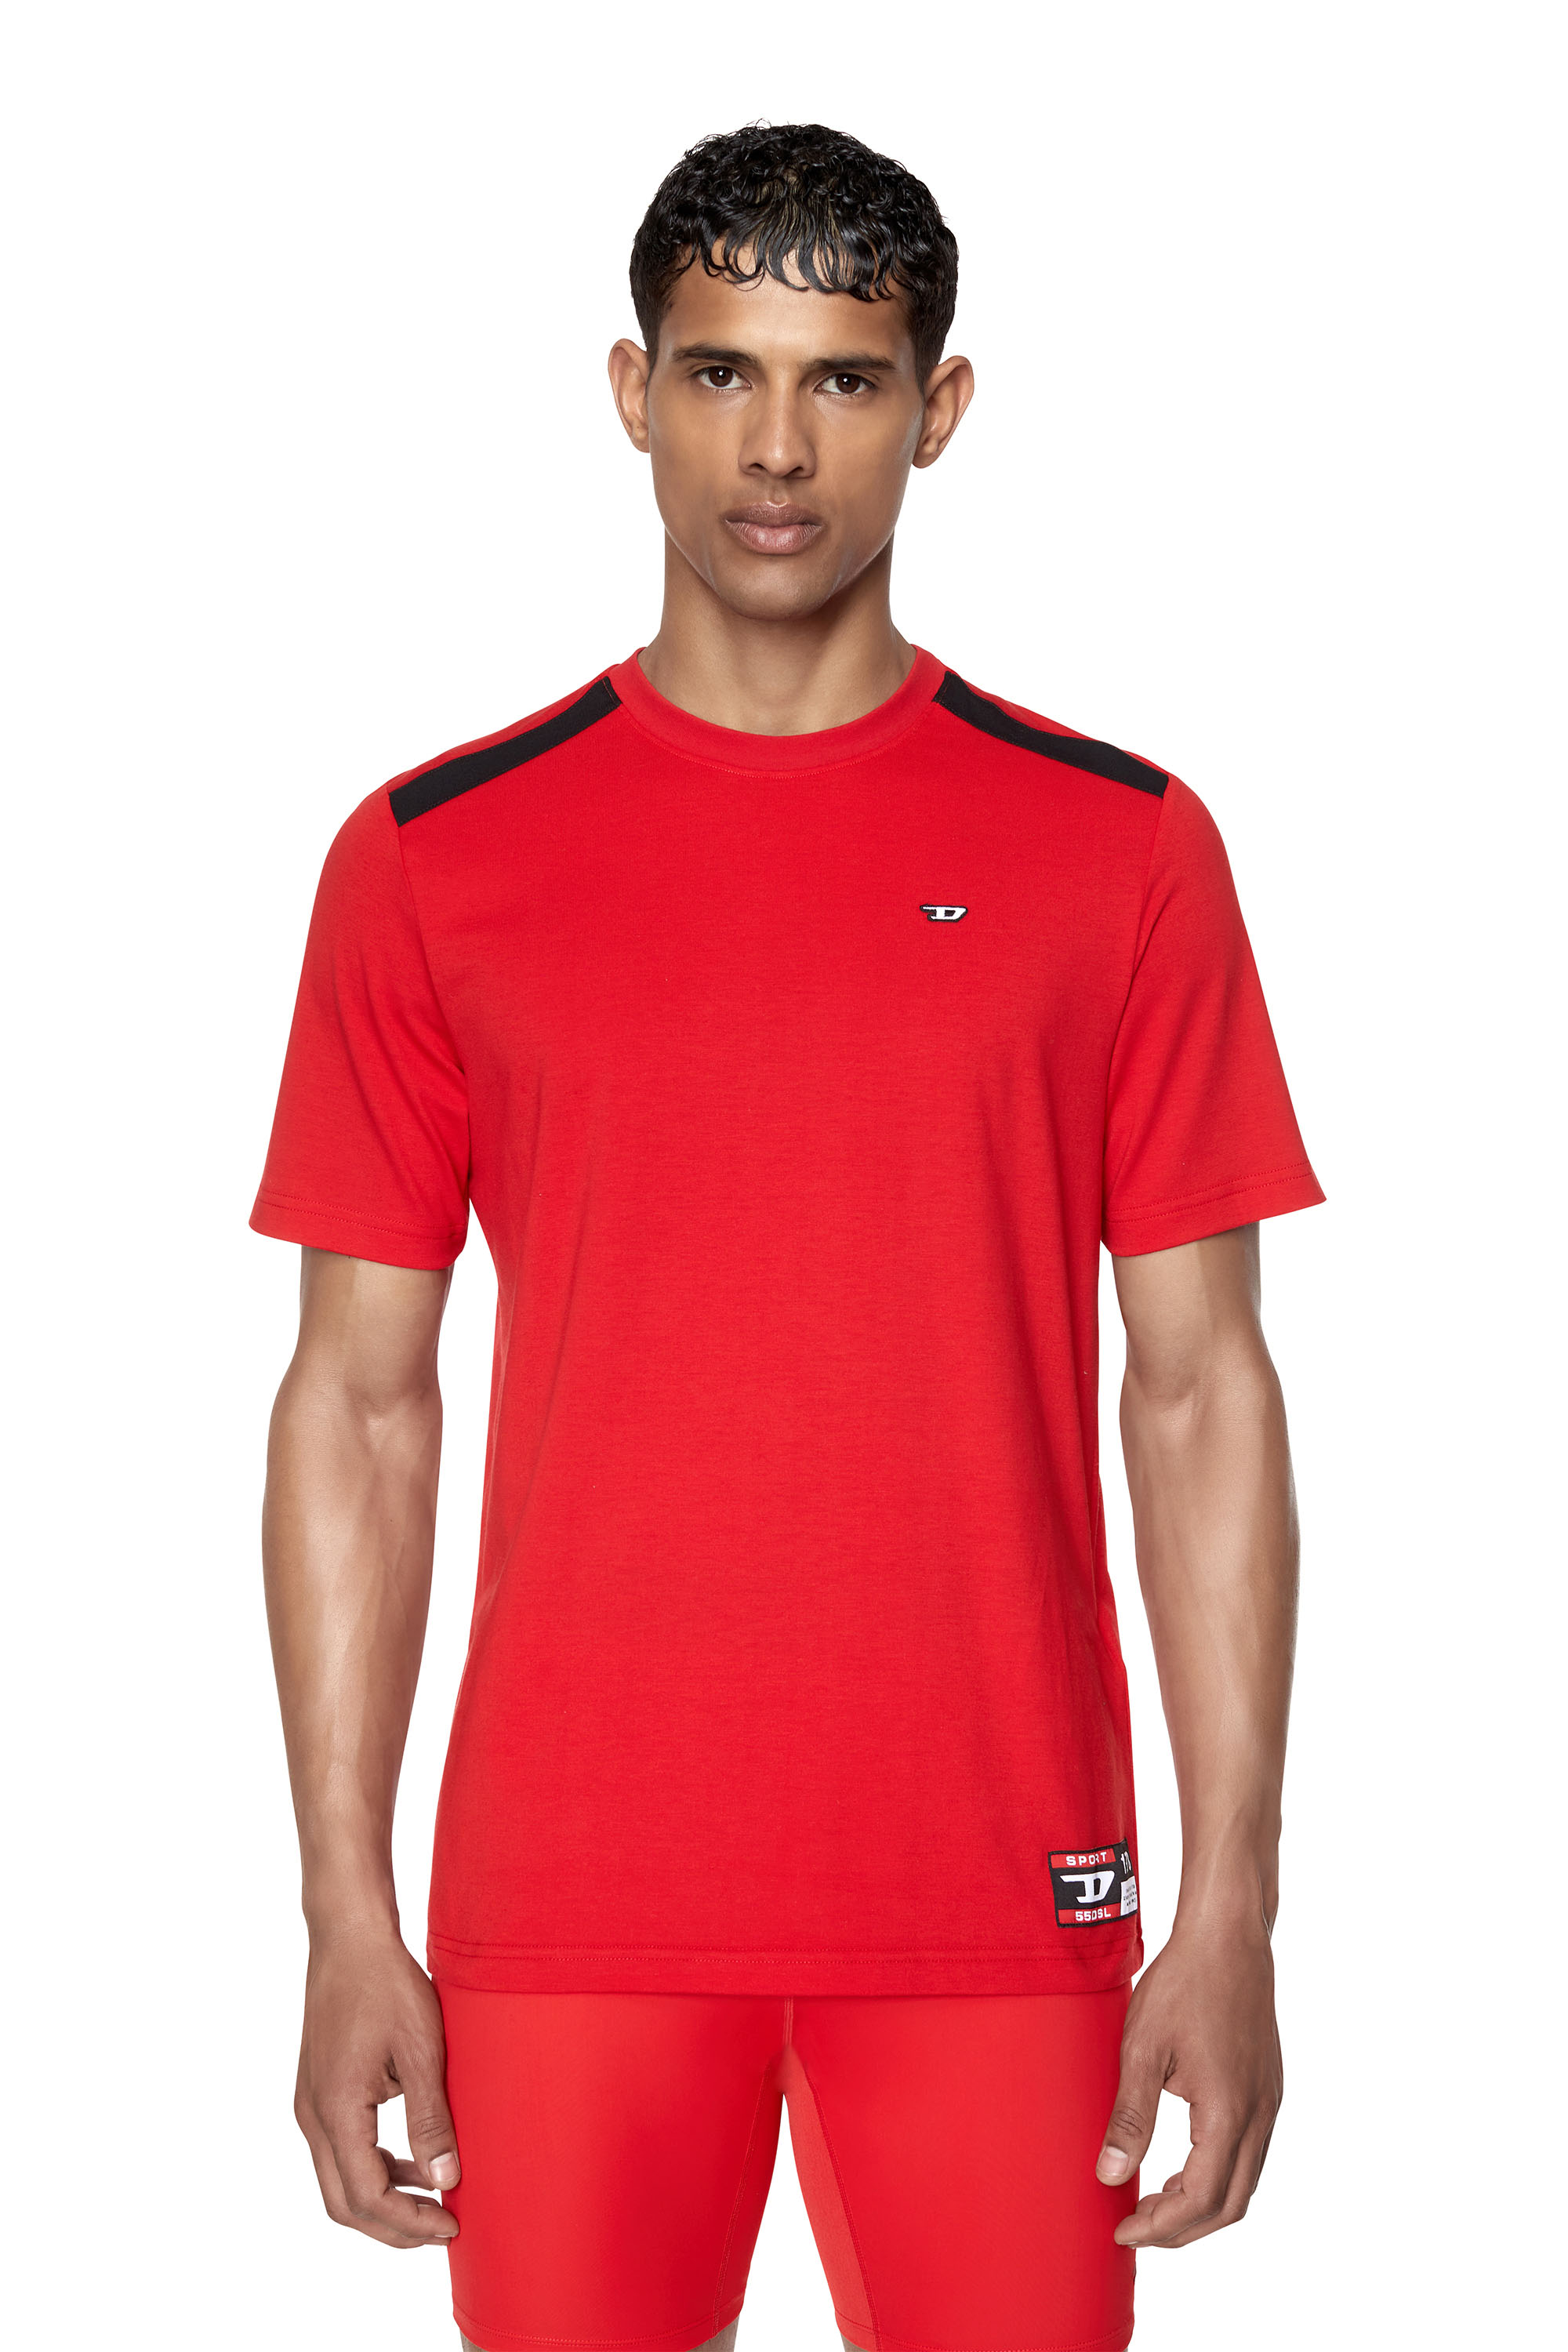 Diesel - T-shirt con bande sulle spalle - T-Shirts - Uomo - Rosso